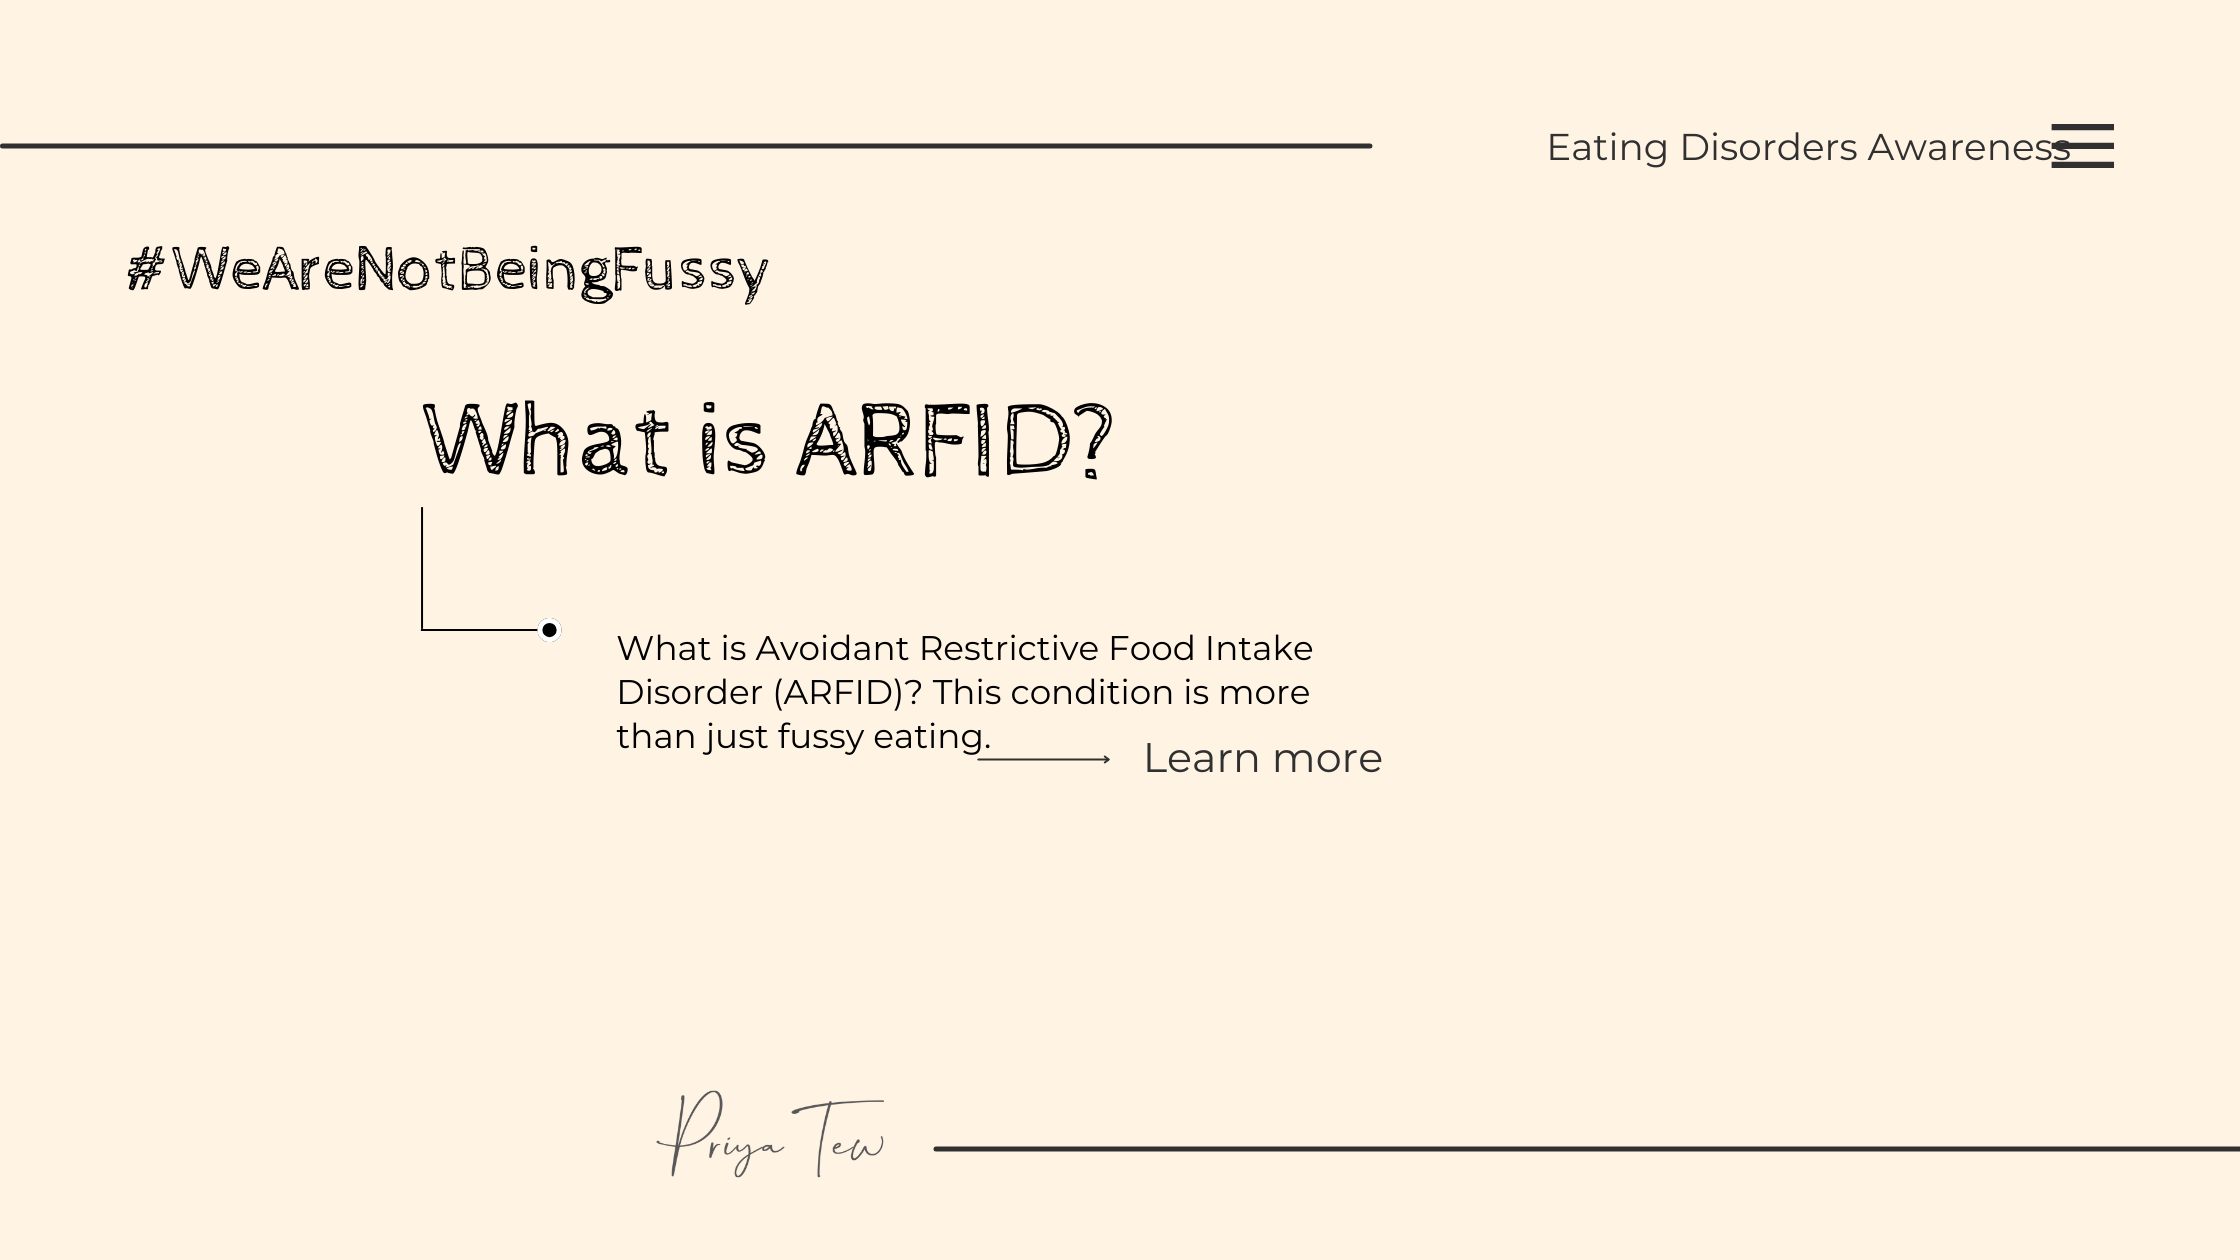 What is ARFID? It is more than fussy eating